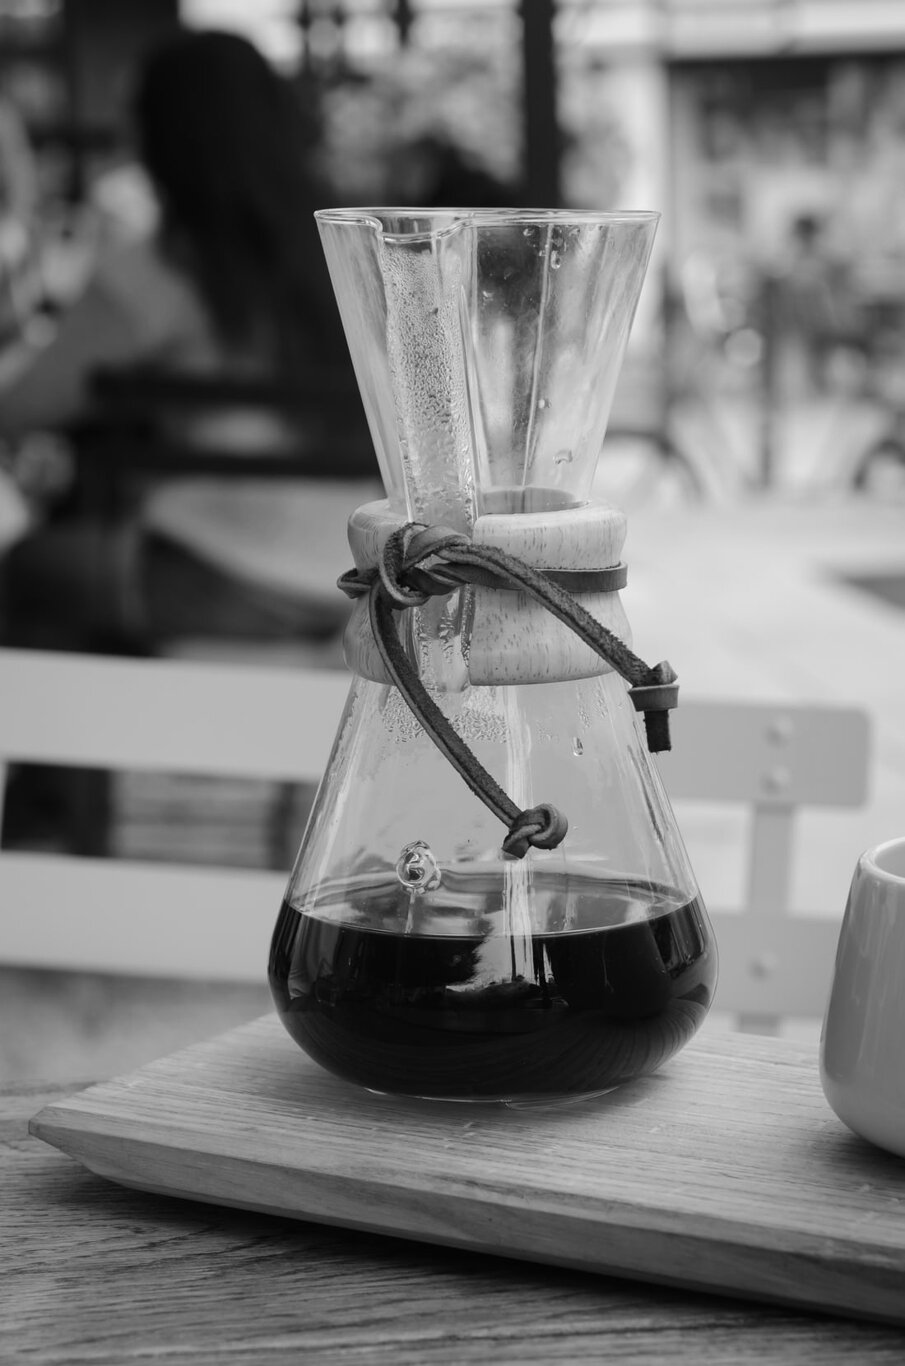 A Chemex coffee brewer full of coffee sits on a wooden tray, ready to be served. Via Unsplash